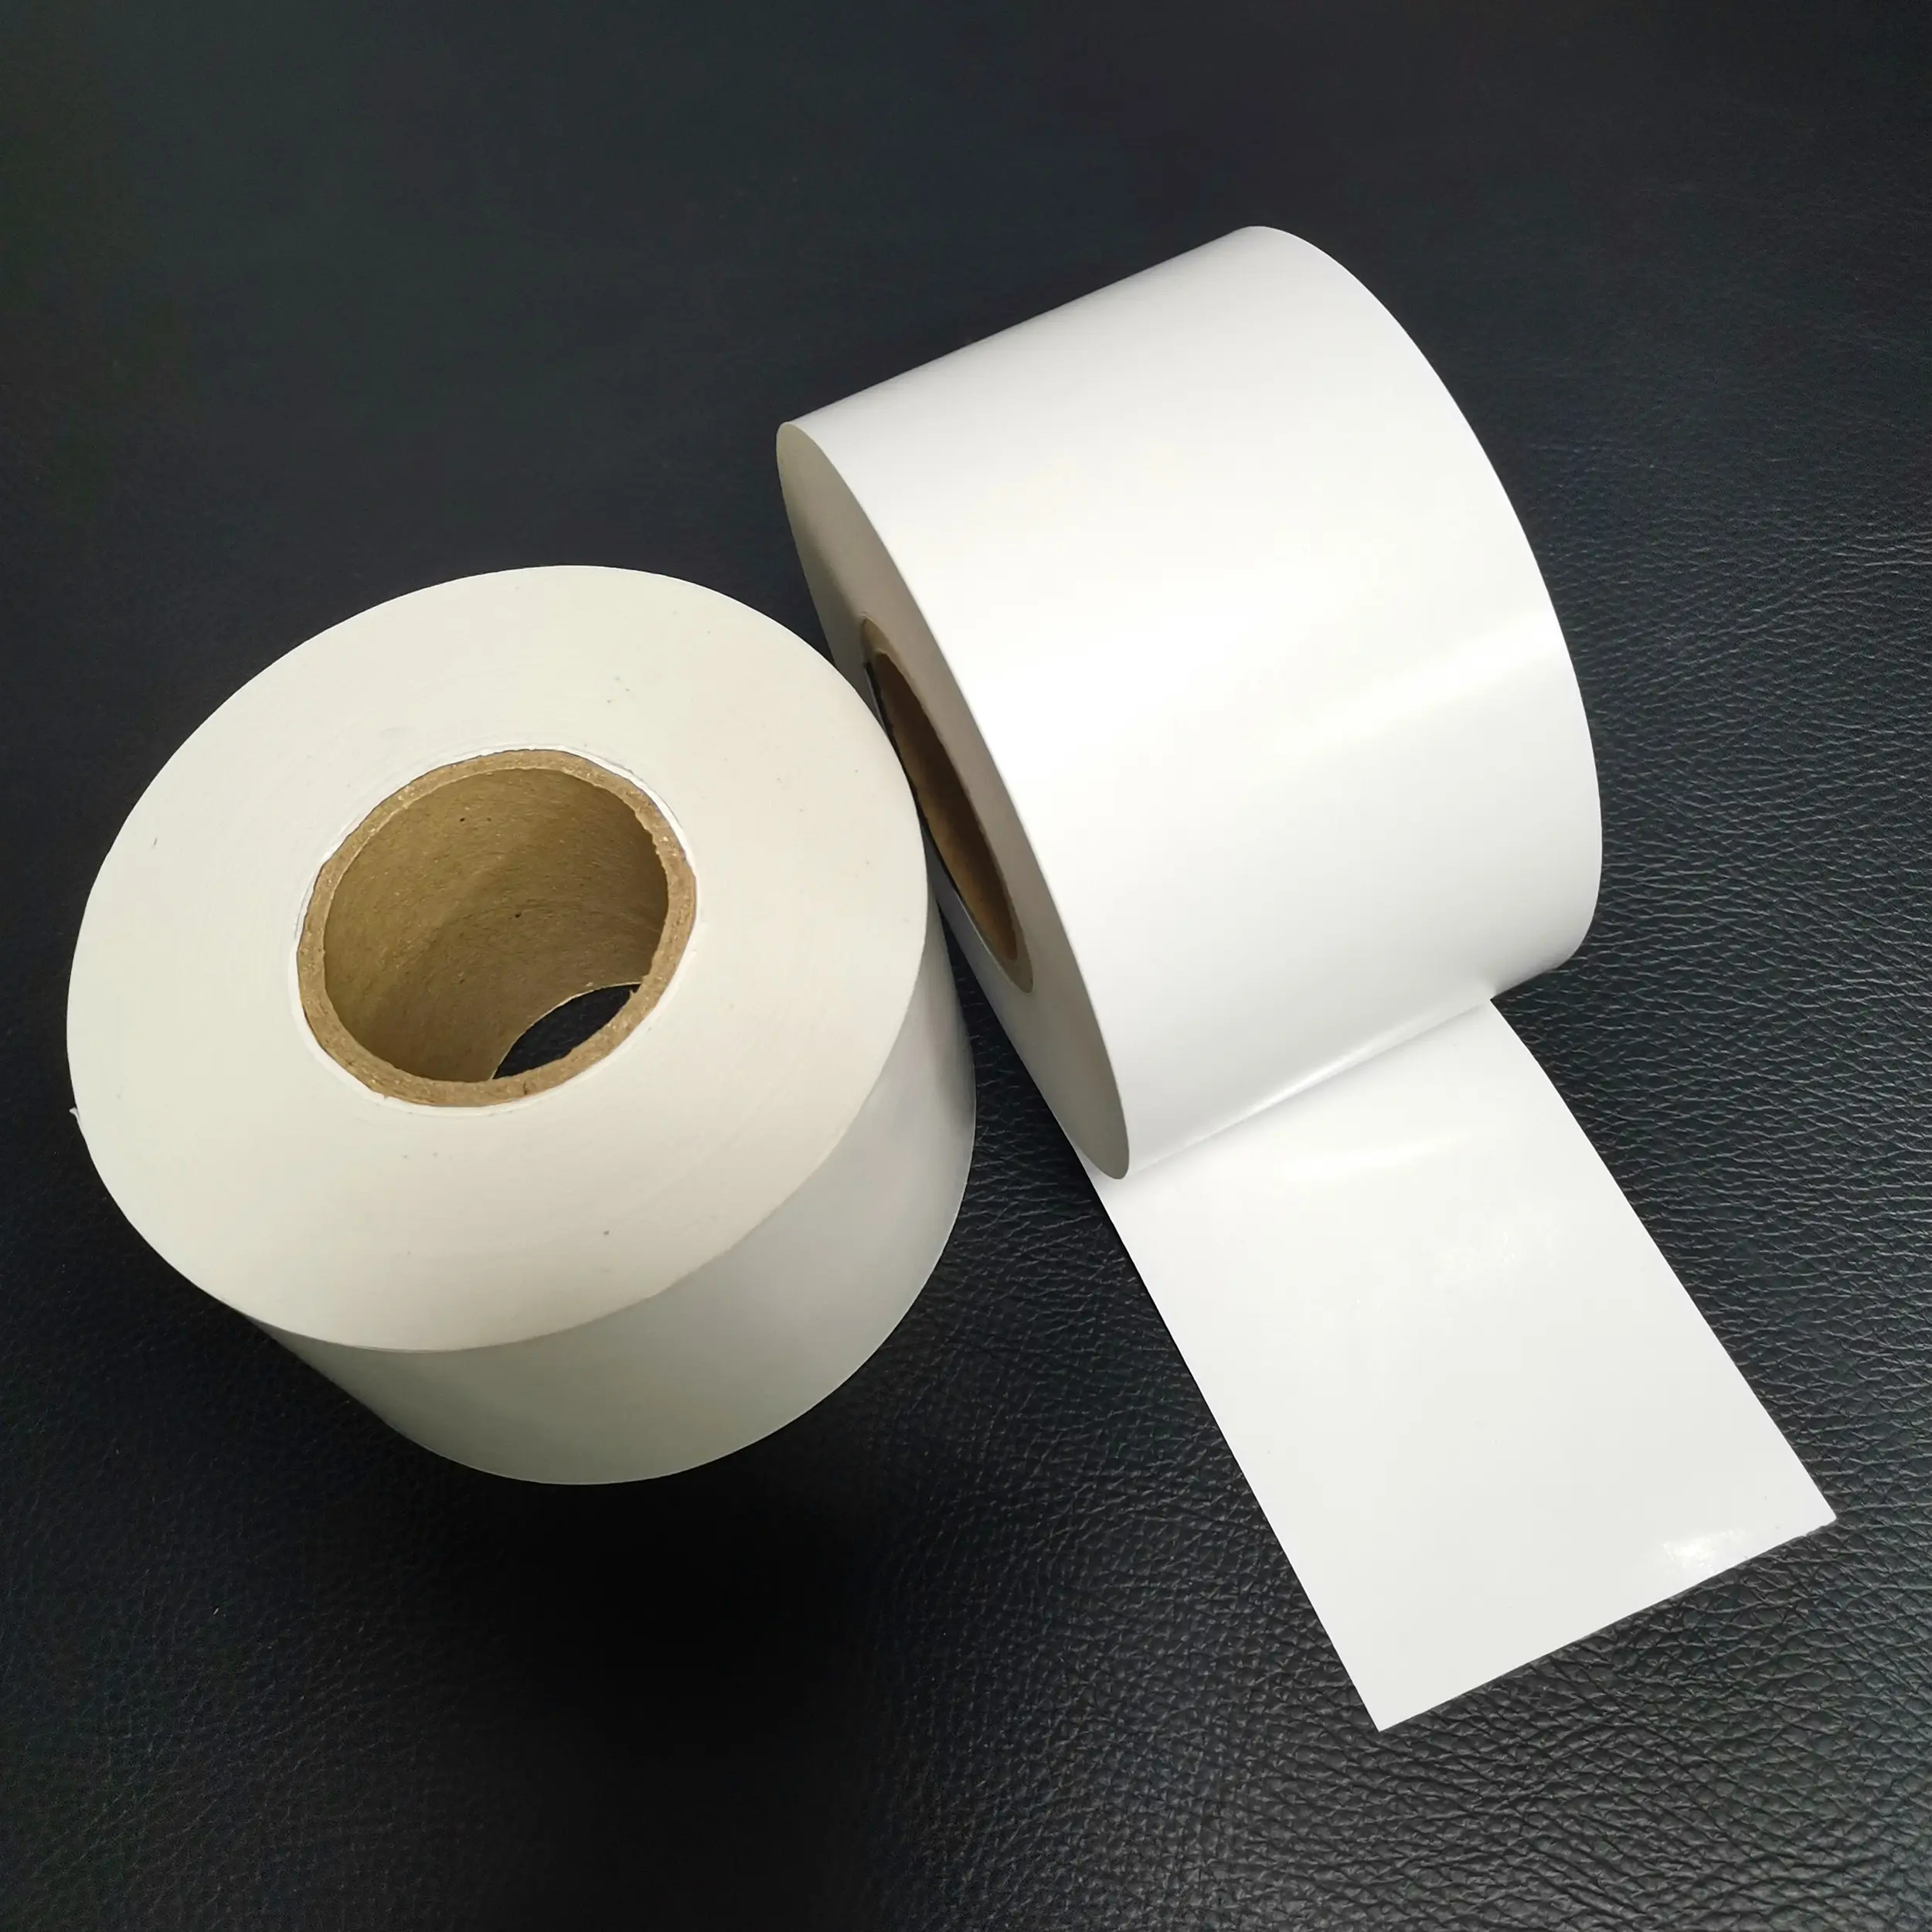  80 Mm X 80 Mm Waterproof Top Coated Thermal Label Liner Less Label For Scale Supermarket